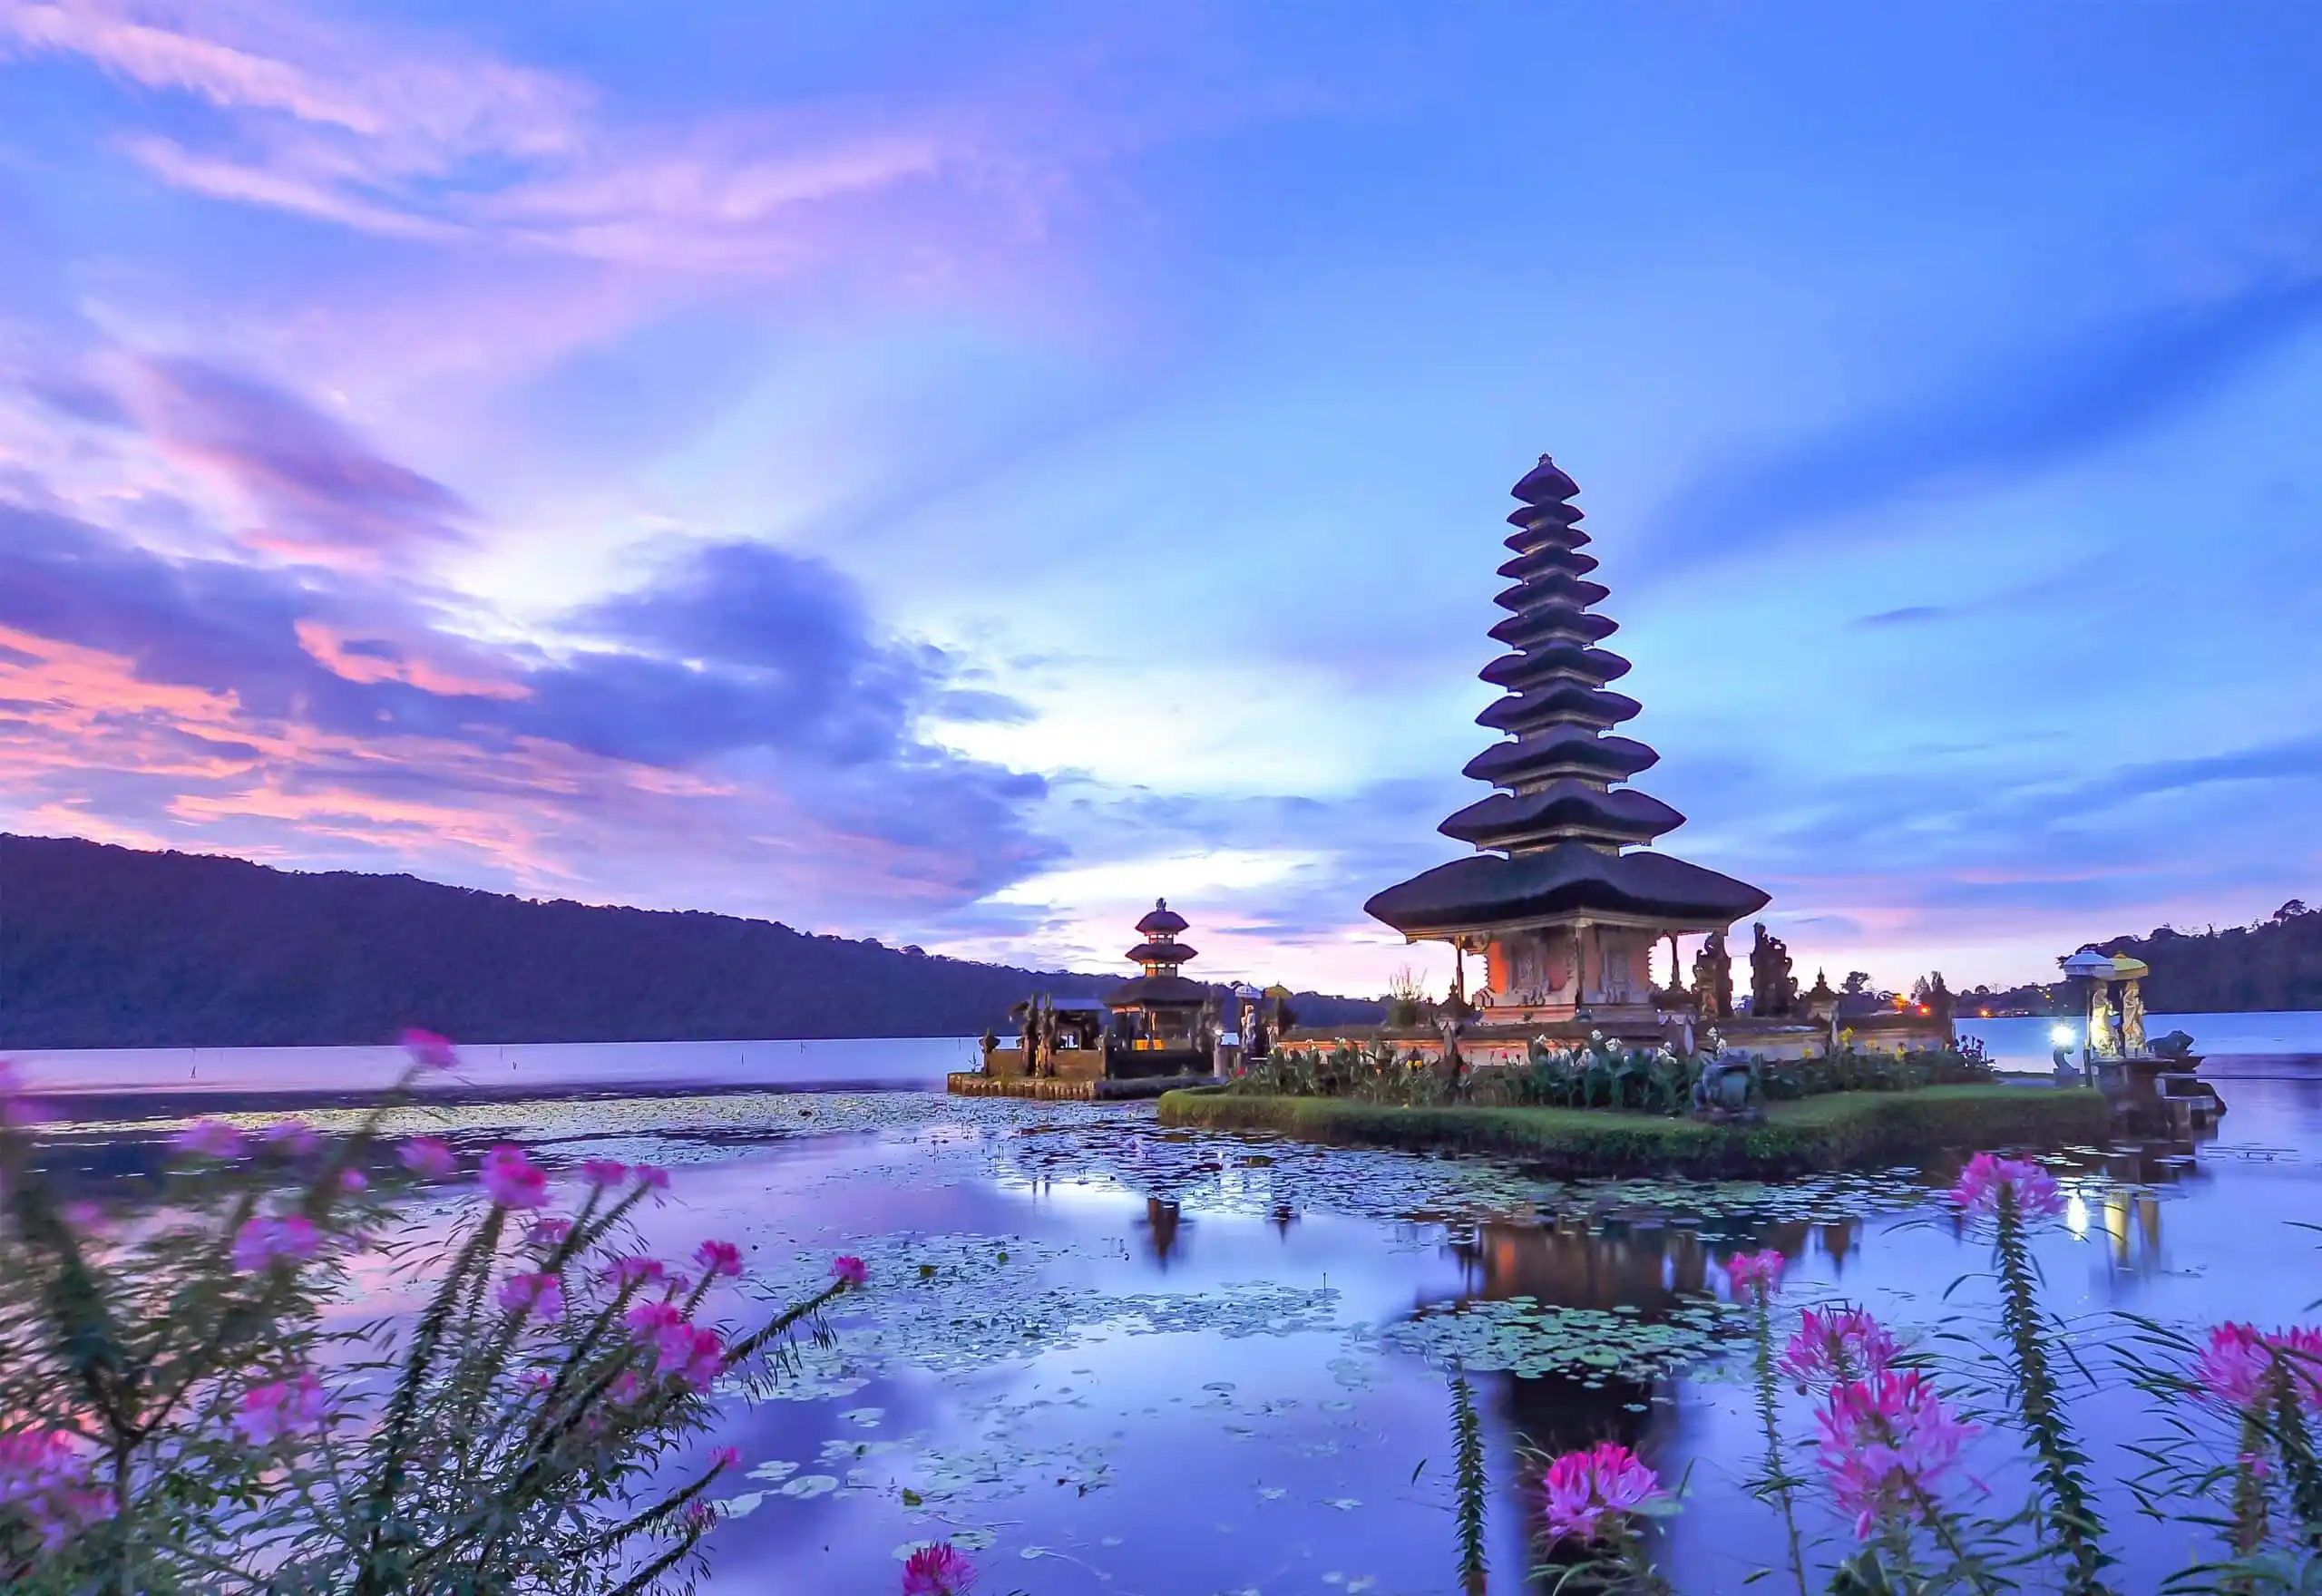 PR , Customer Services , Sales and Marketing Courses in Bali